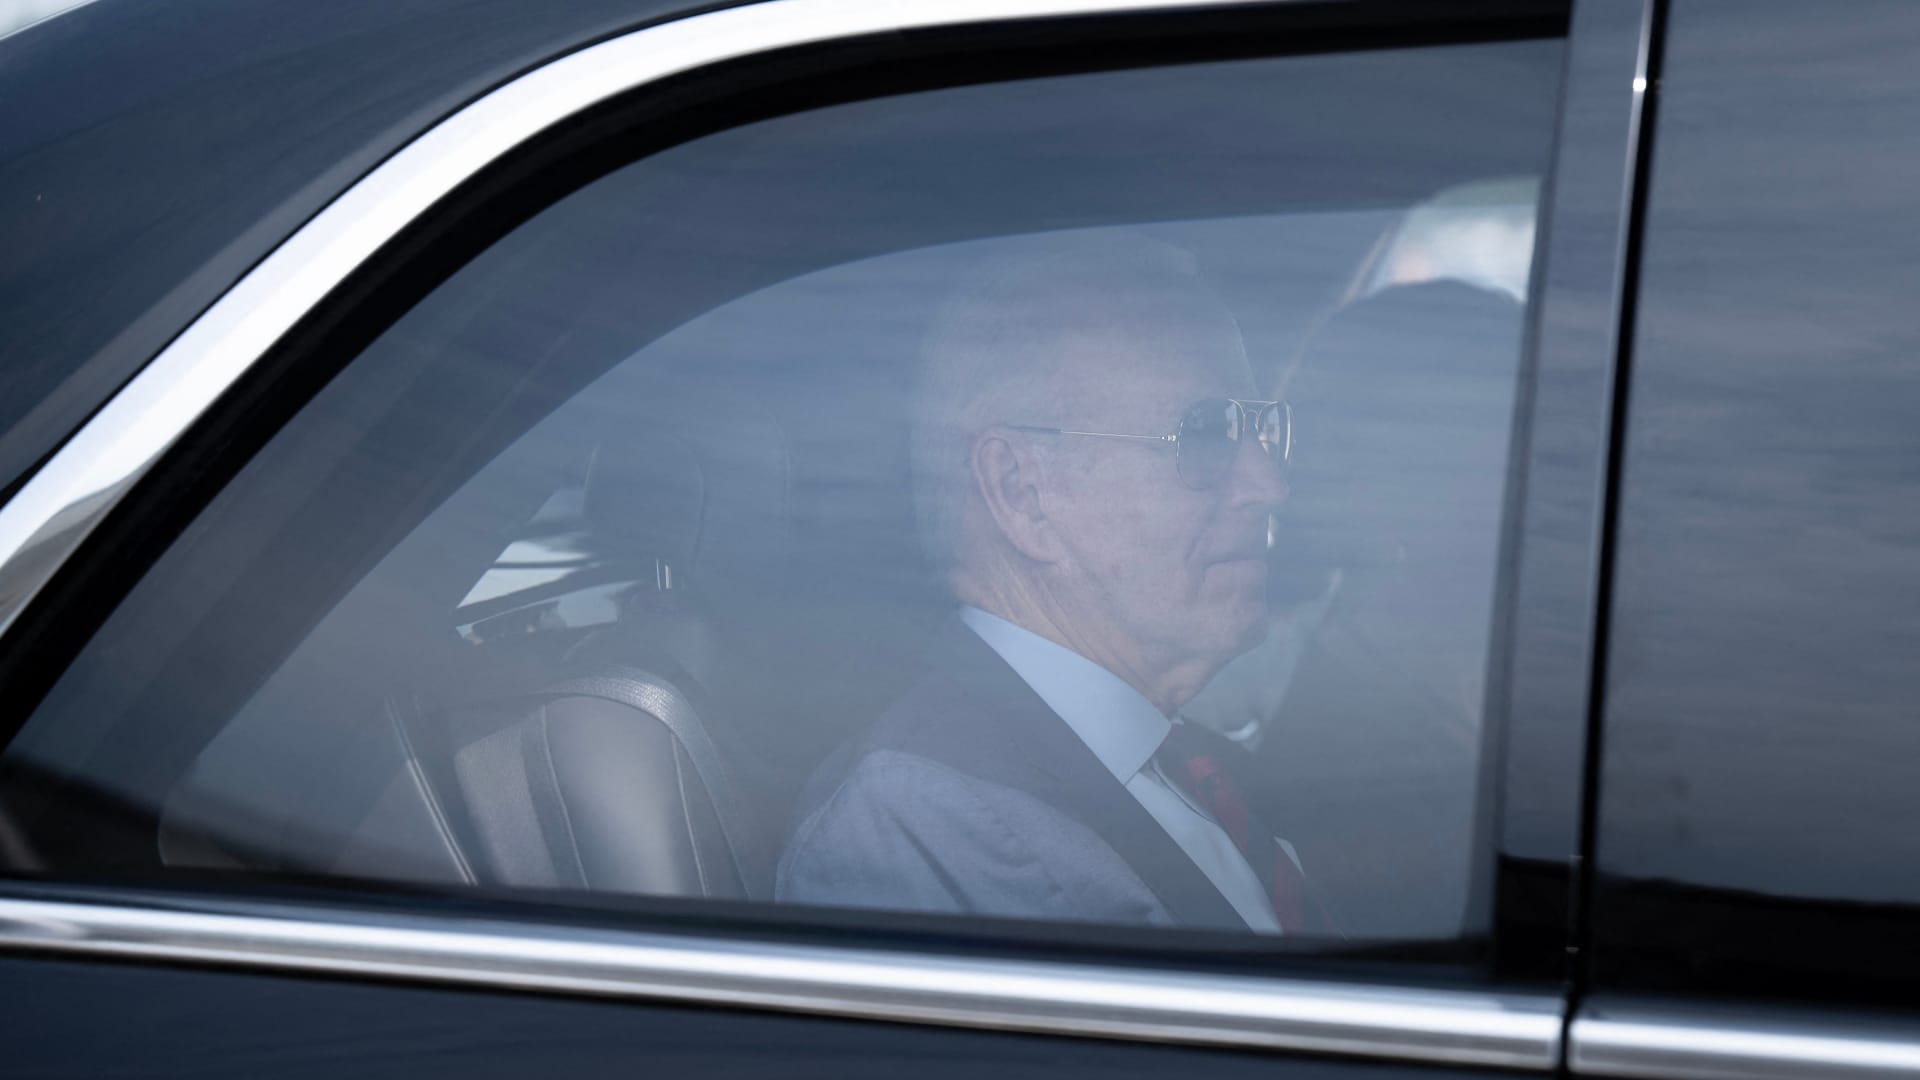 US President Joe Biden arrives to board Air Force One at Joint Base Andrews in Maryland on June 9, 2023. The President and US First Lady Jill Biden travel to North Carolina.